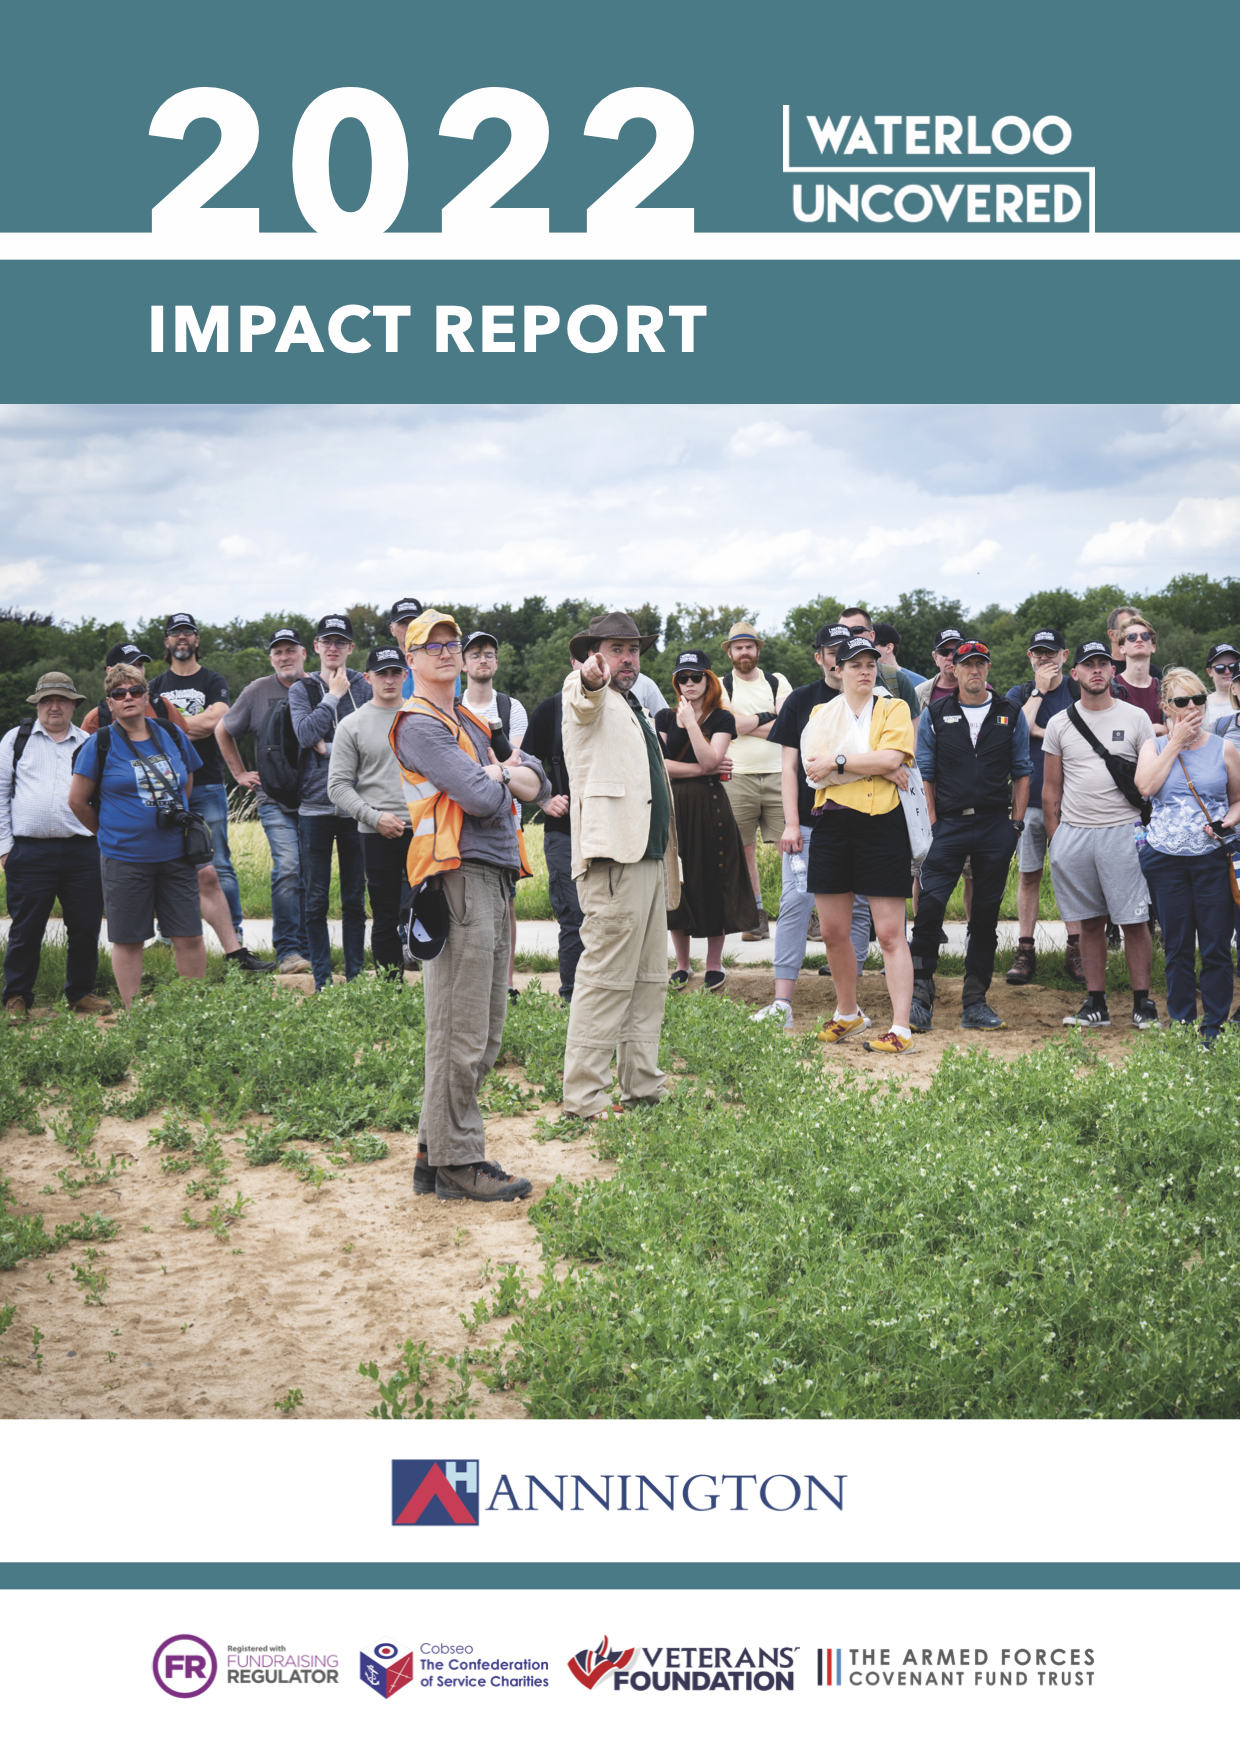 The cover of the 2022 Impact Report.